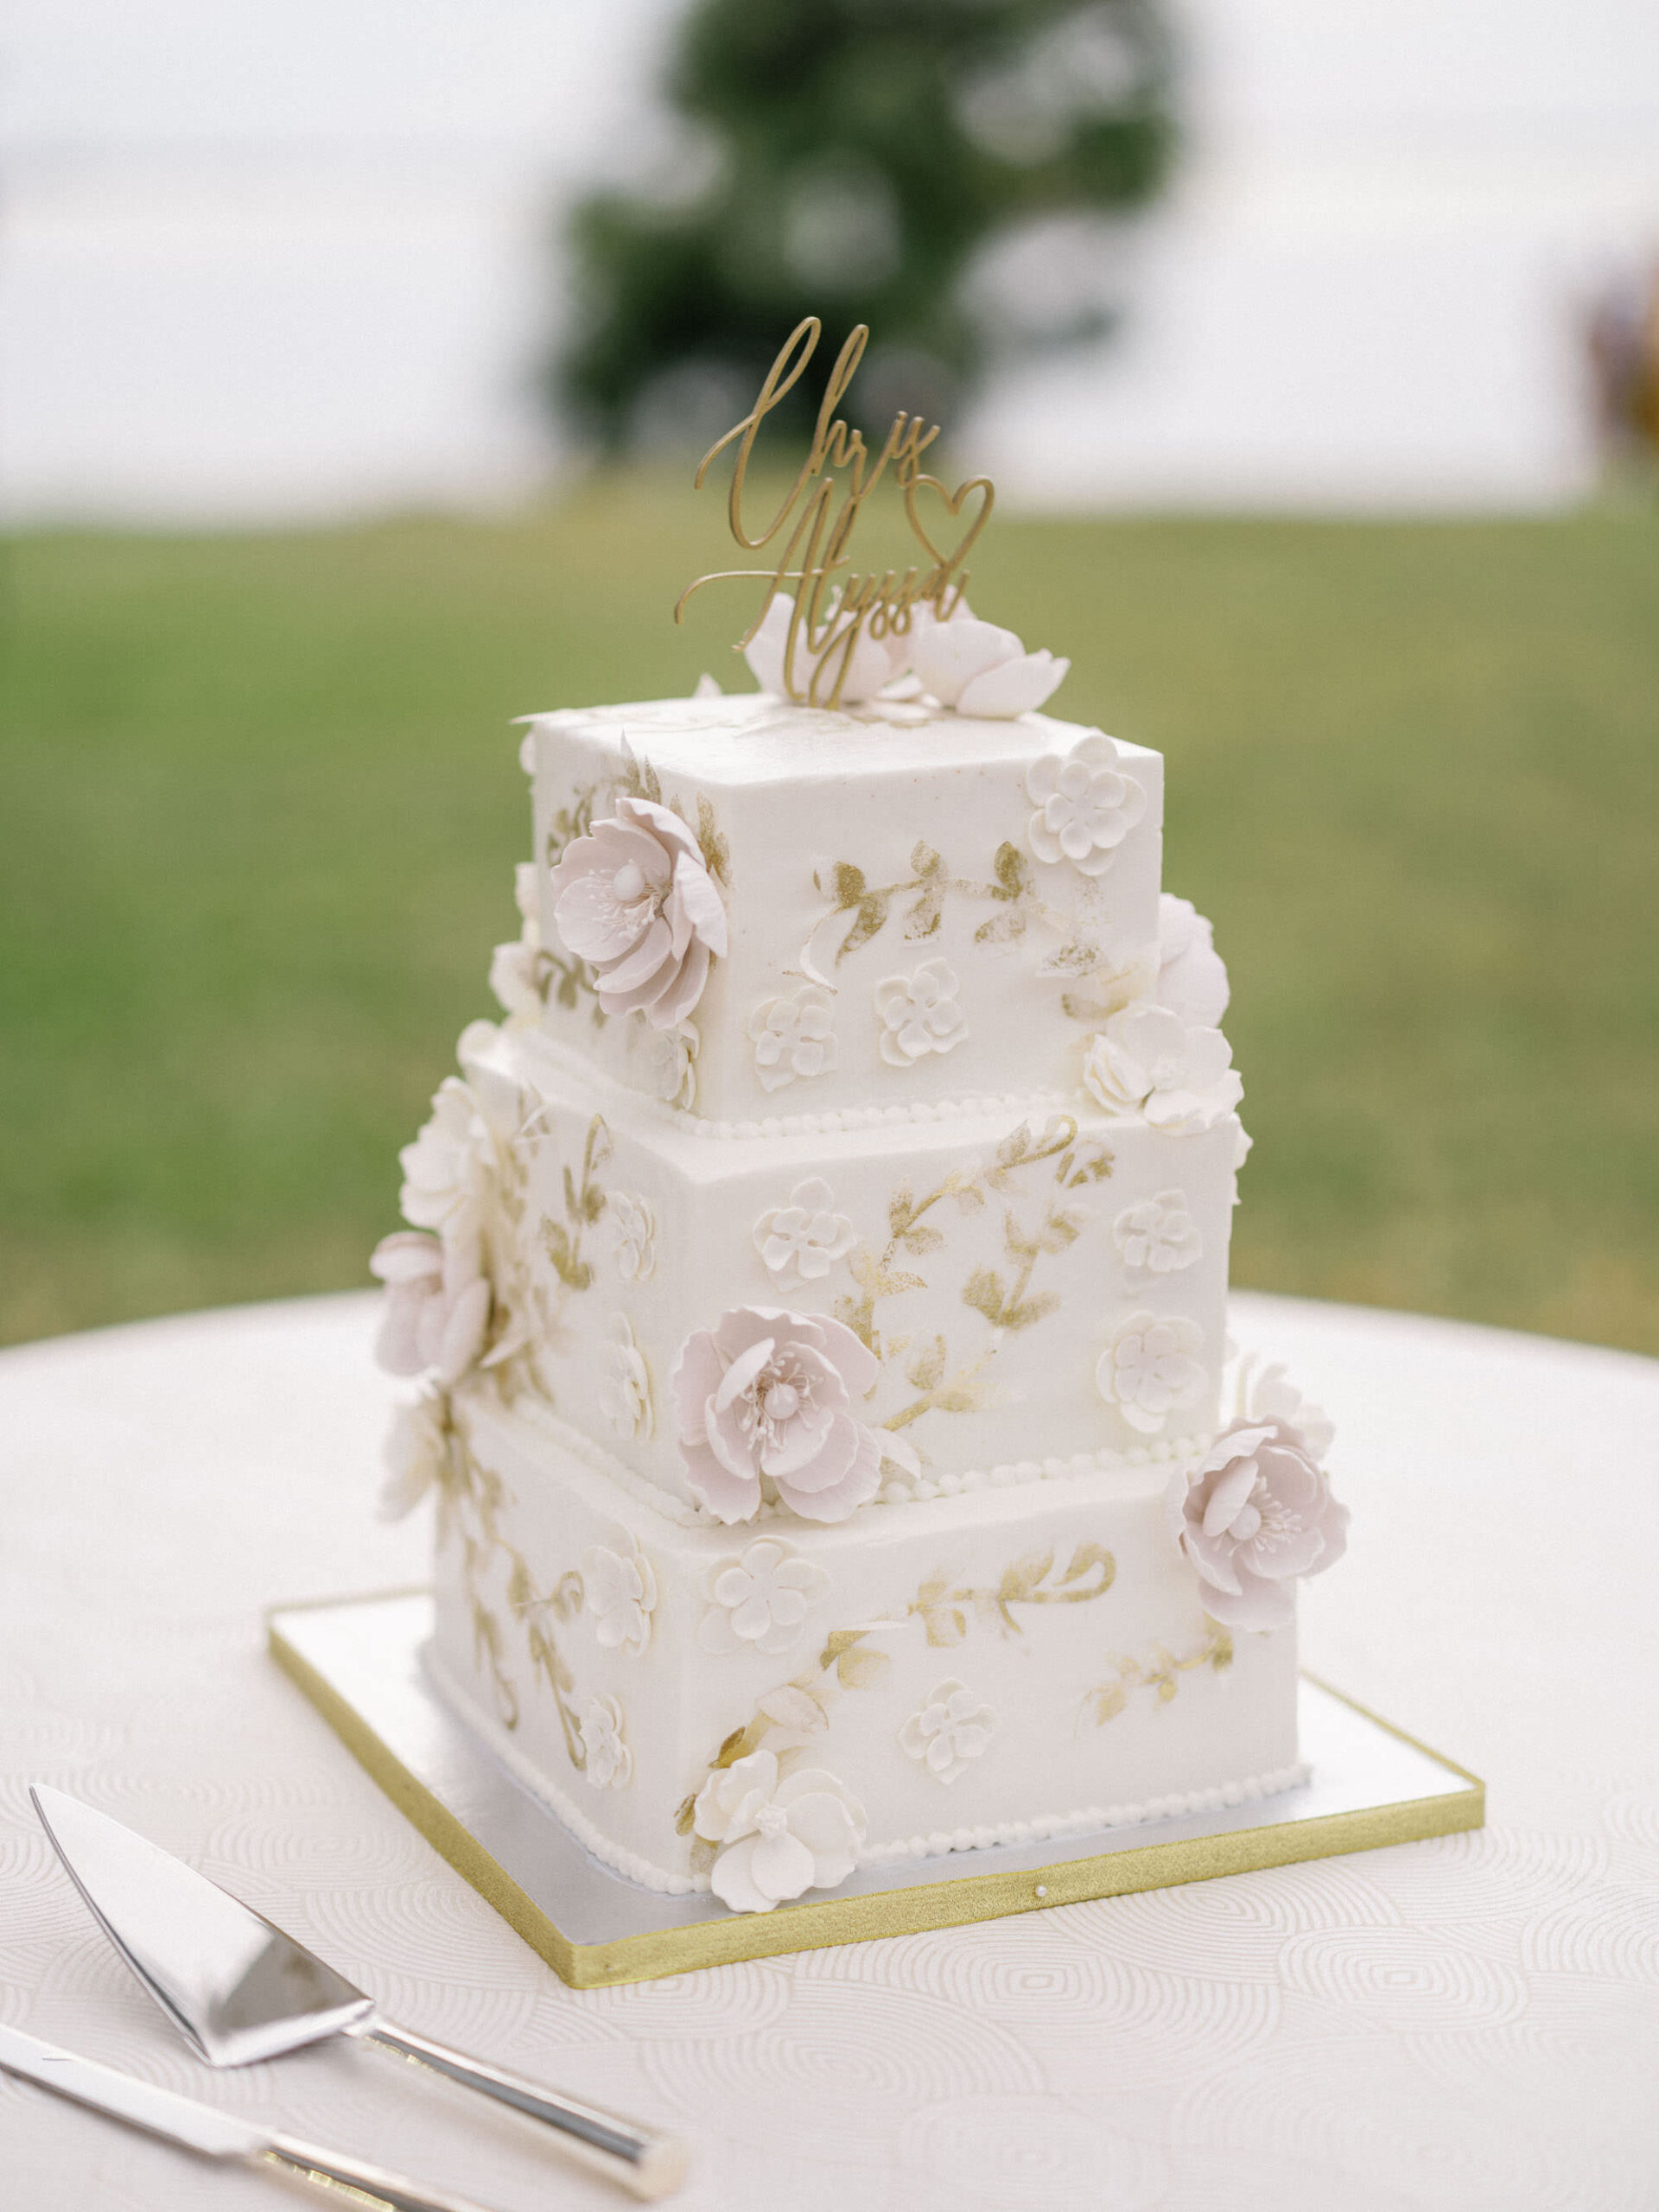 Luxurious Classic Wedding Reception, Three Tier Square Cake with Gold Painted Leaves and Sugar Flowers with Gold Laser Cut Cake Topper